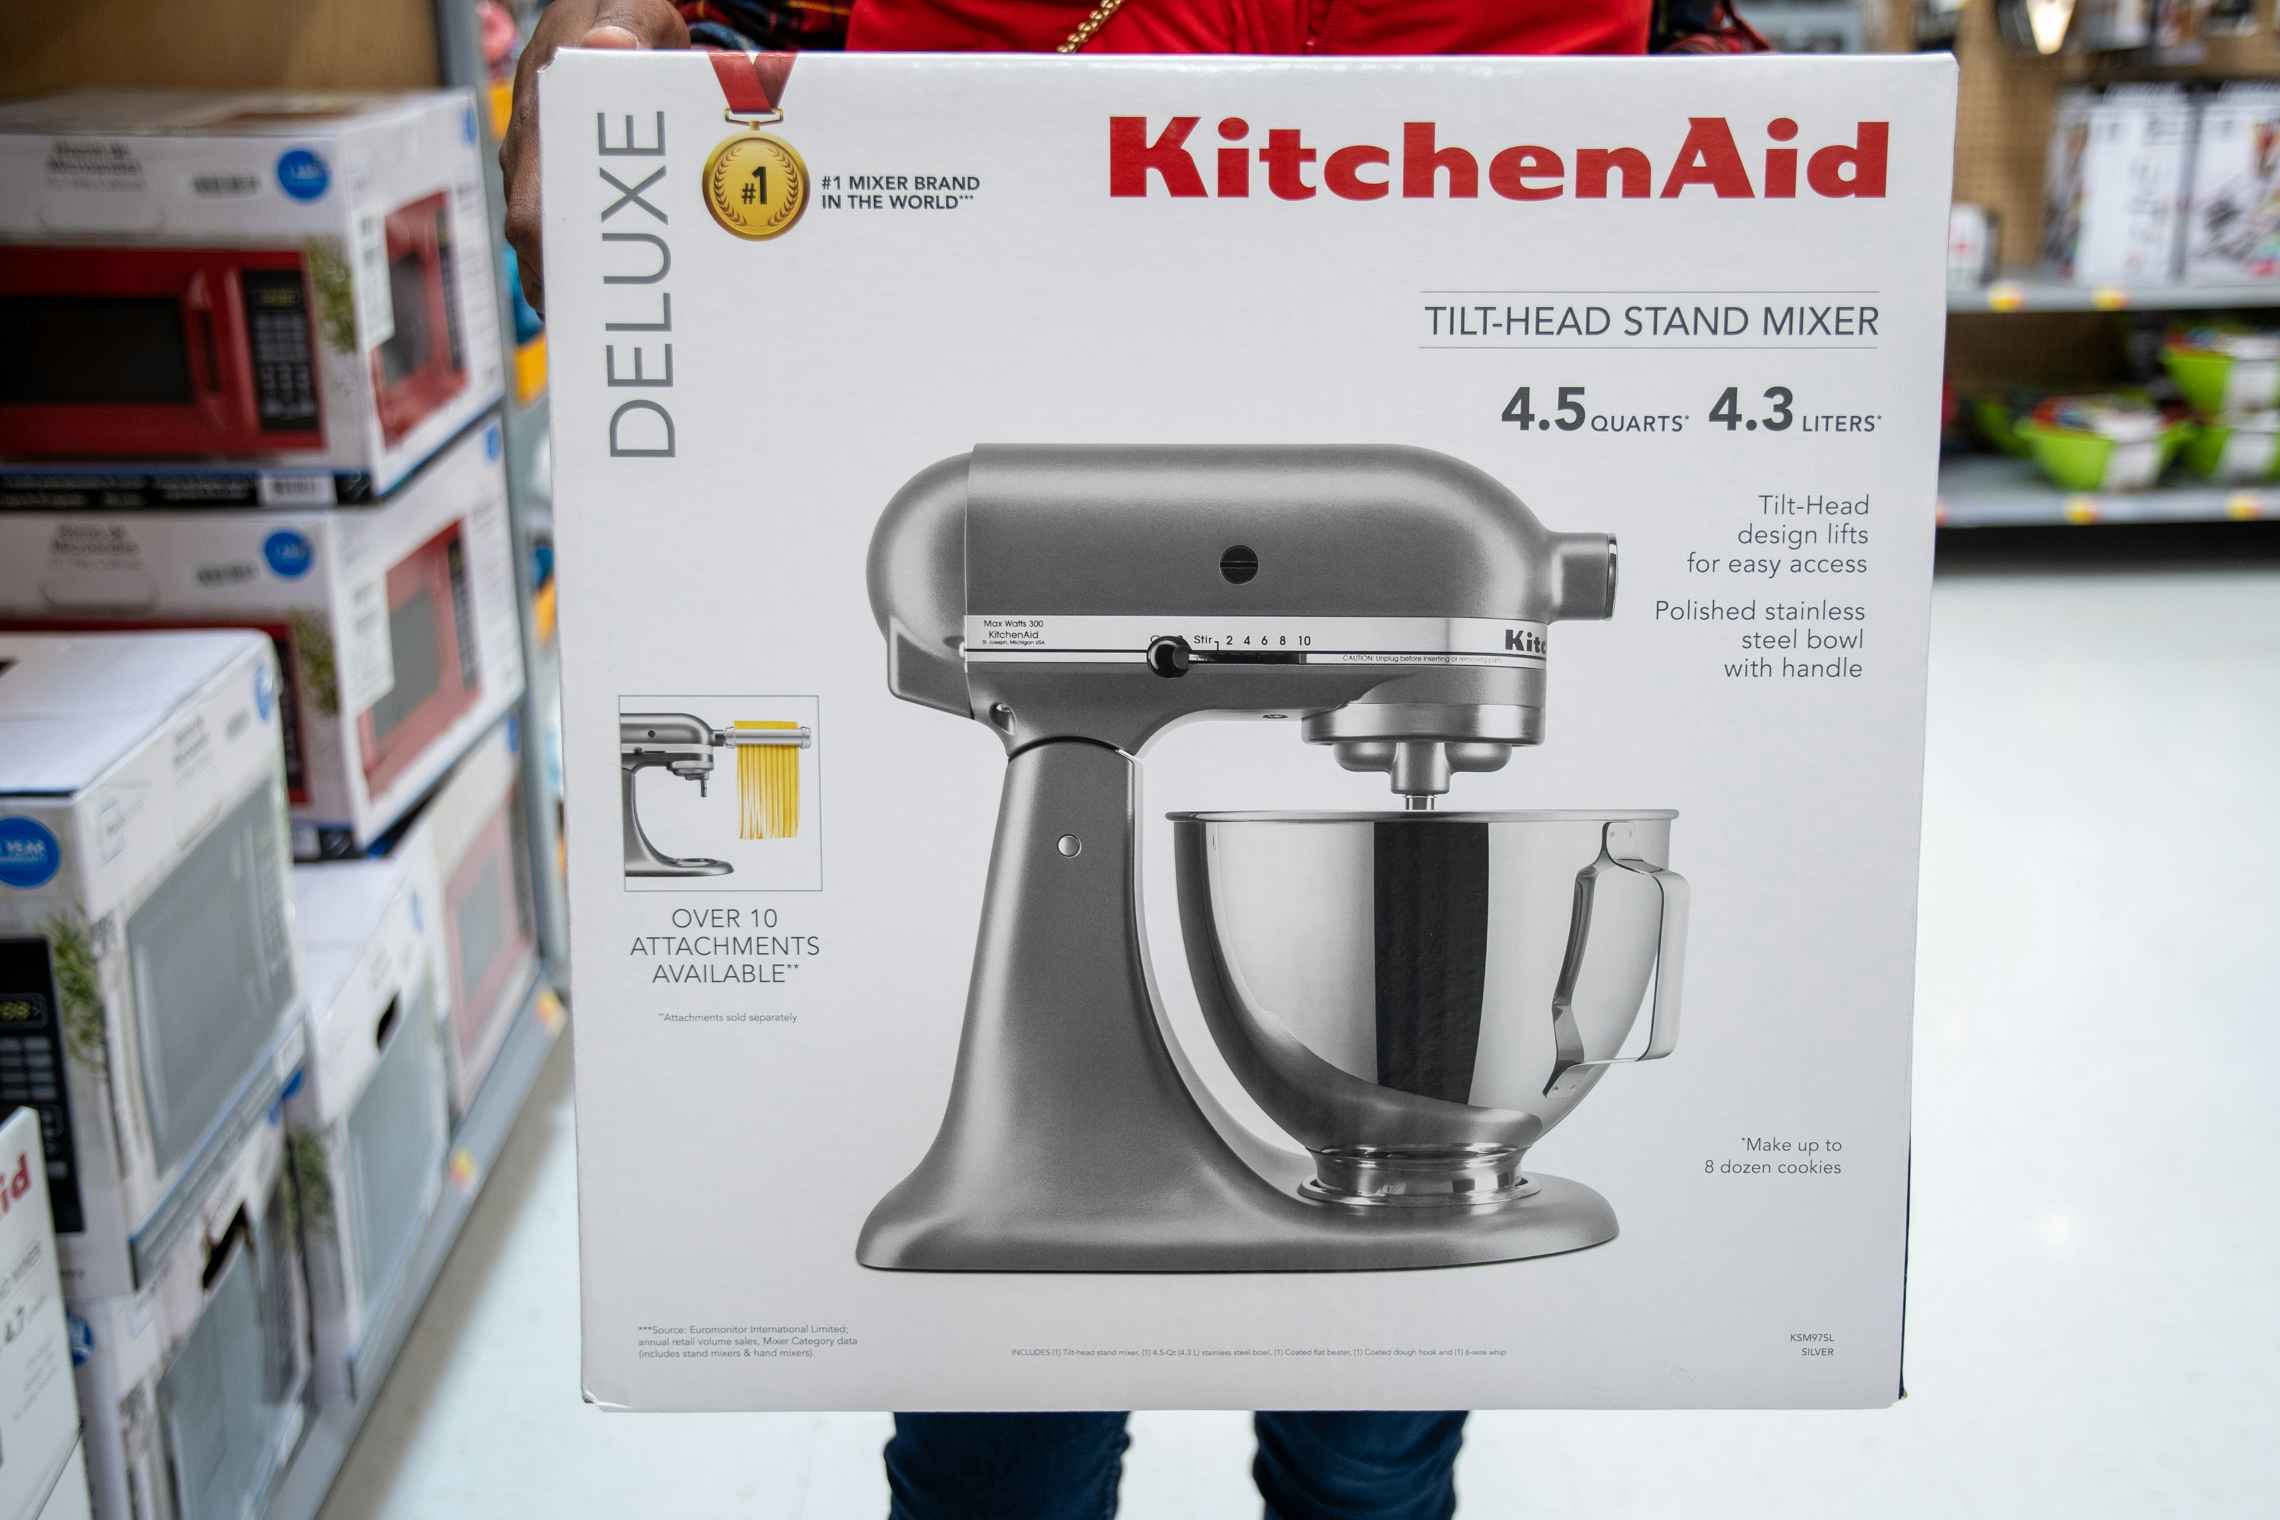 A woman holding a box containing a KitchenAid stand mixer